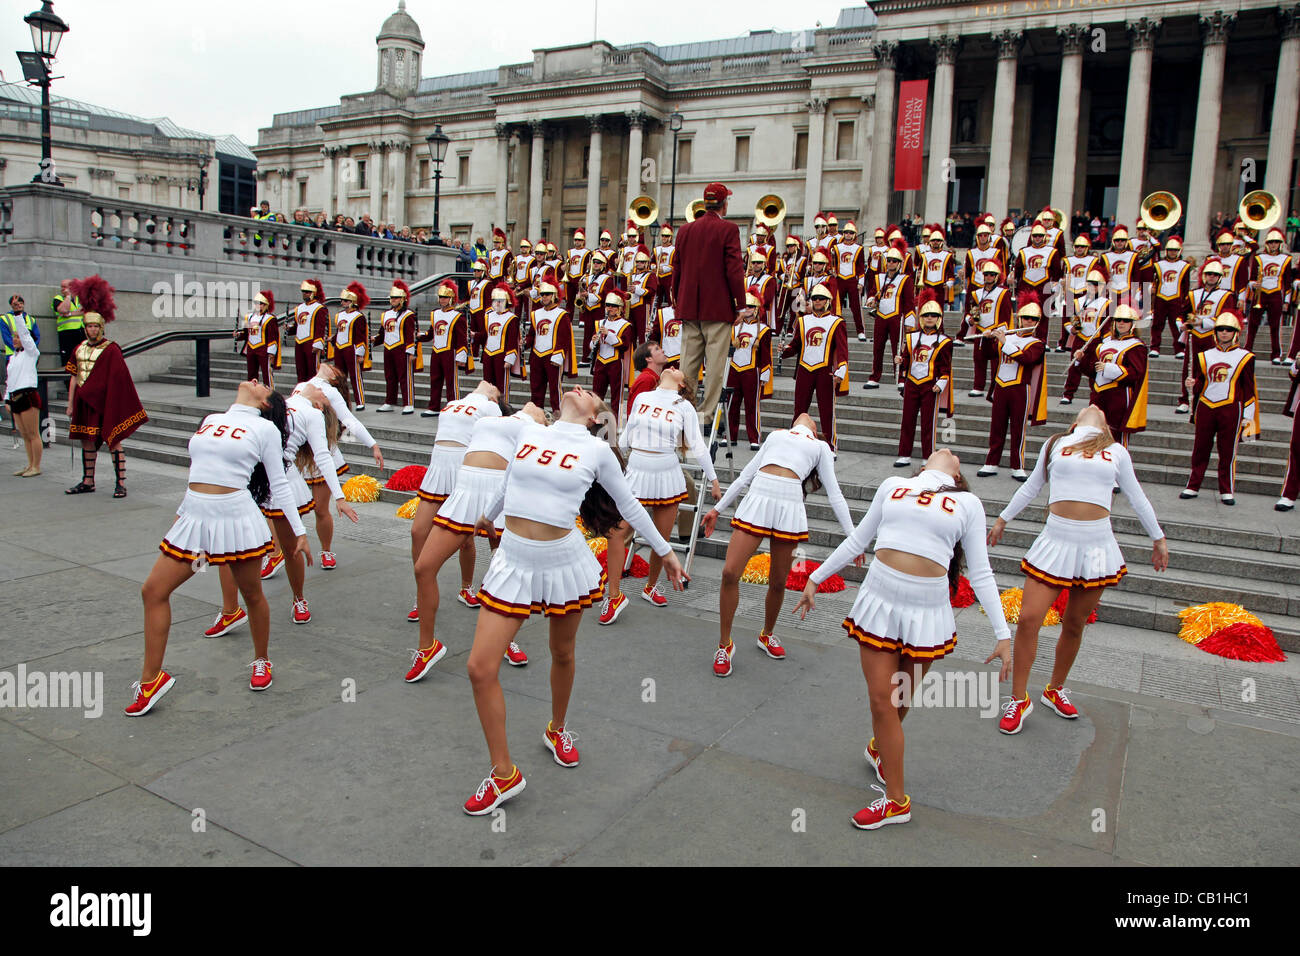 London, UK. Sunday 20th May 2012. USC Marching Trojans from the University of Southern California in Trafalgar Square, London. Stock Photo